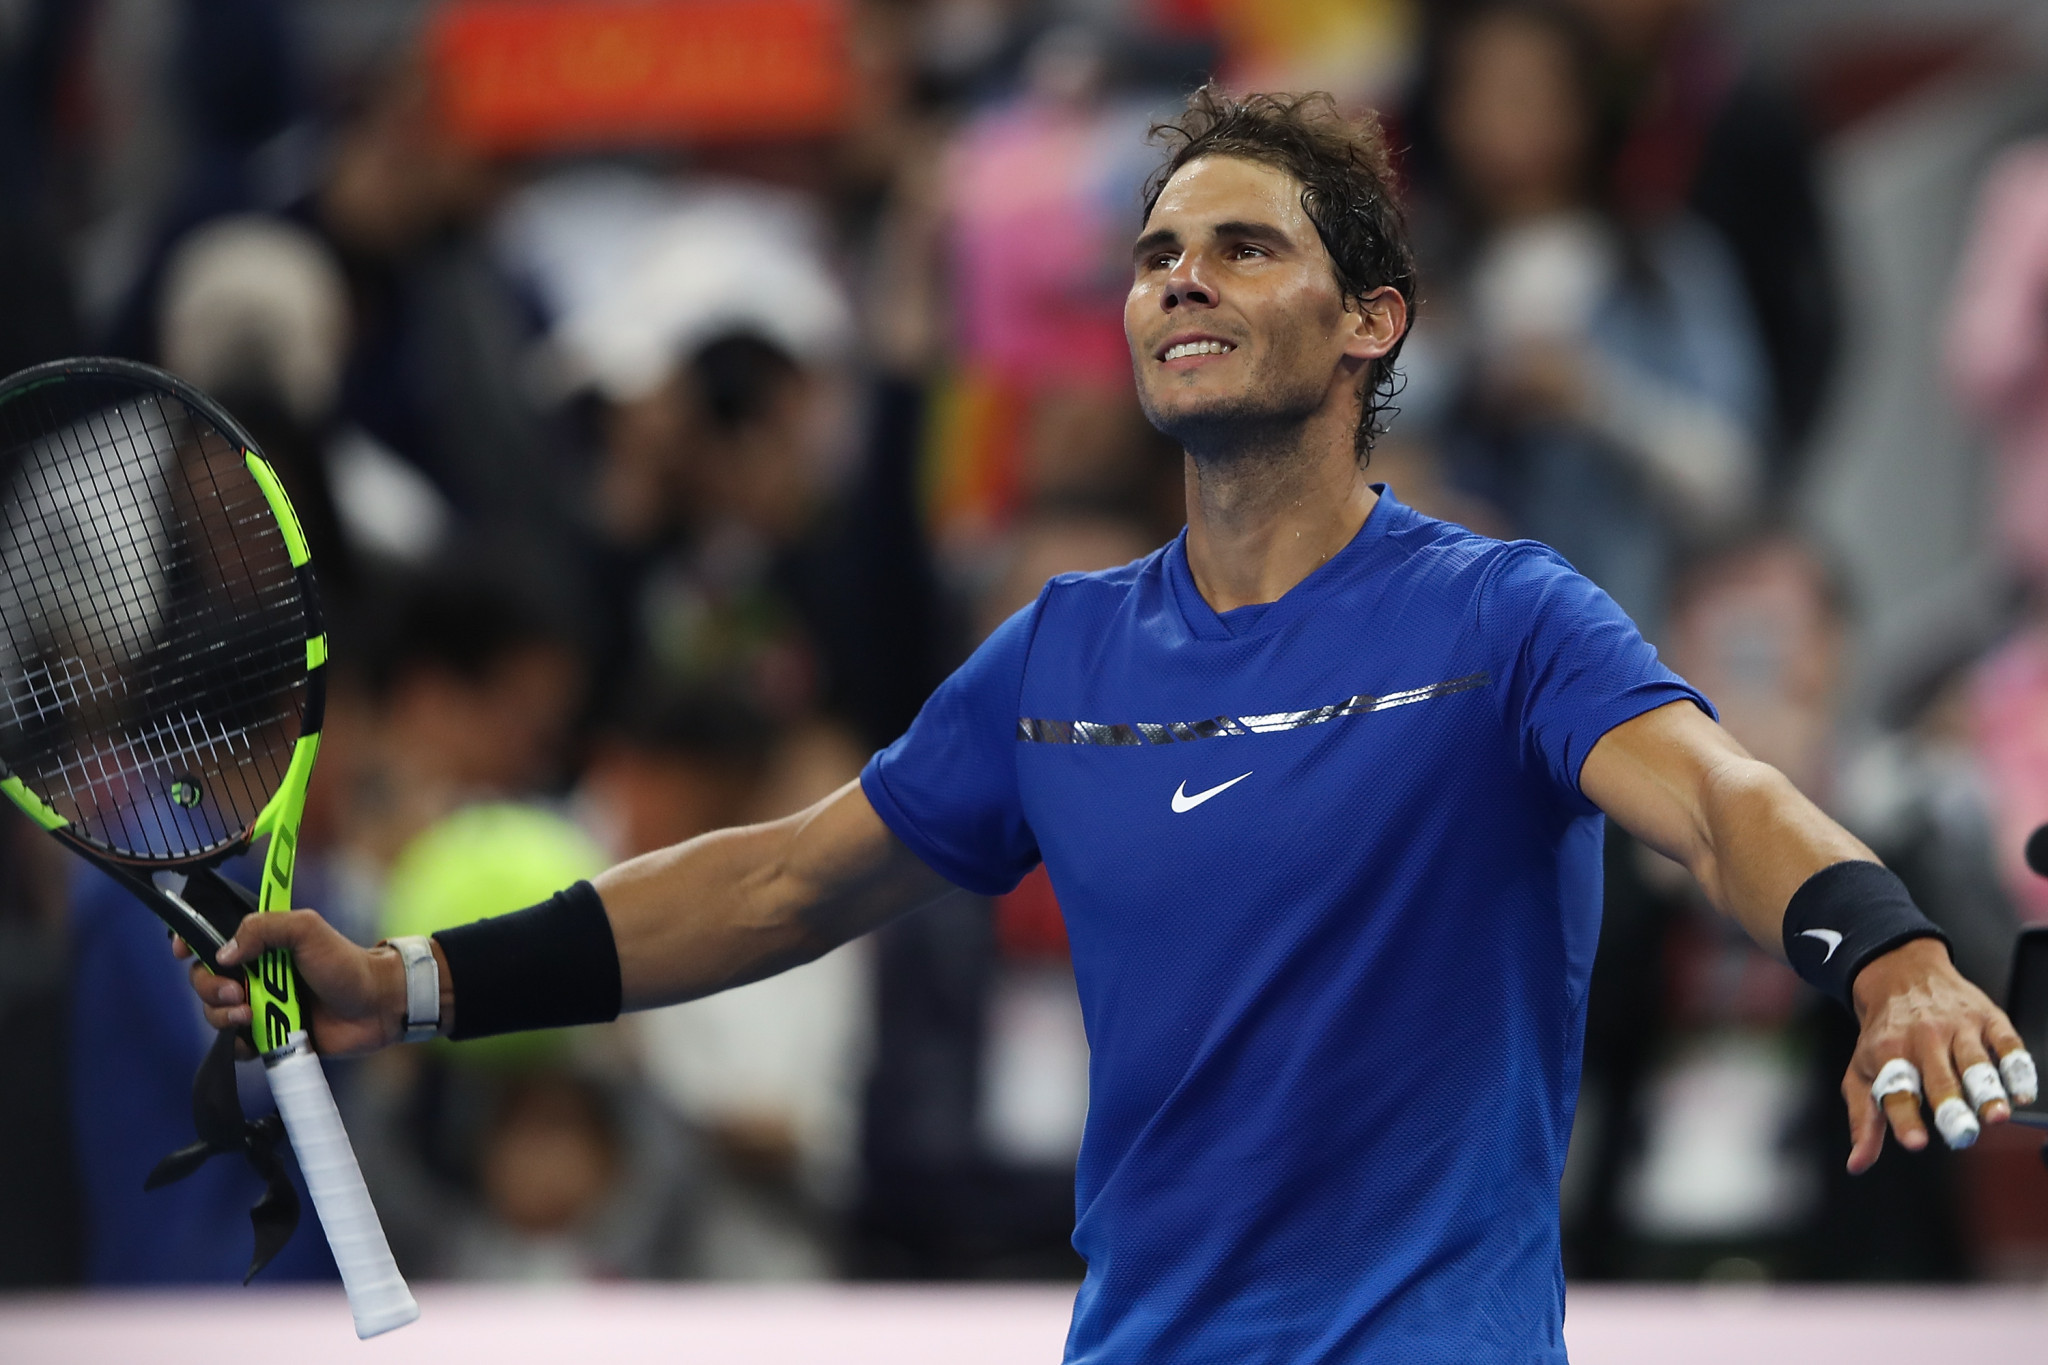 World number one Rafael Nadal breezed through to the quarter-finals of the China Open after beating Russia’s Karen Khachanov in straight sets today ©Getty Images